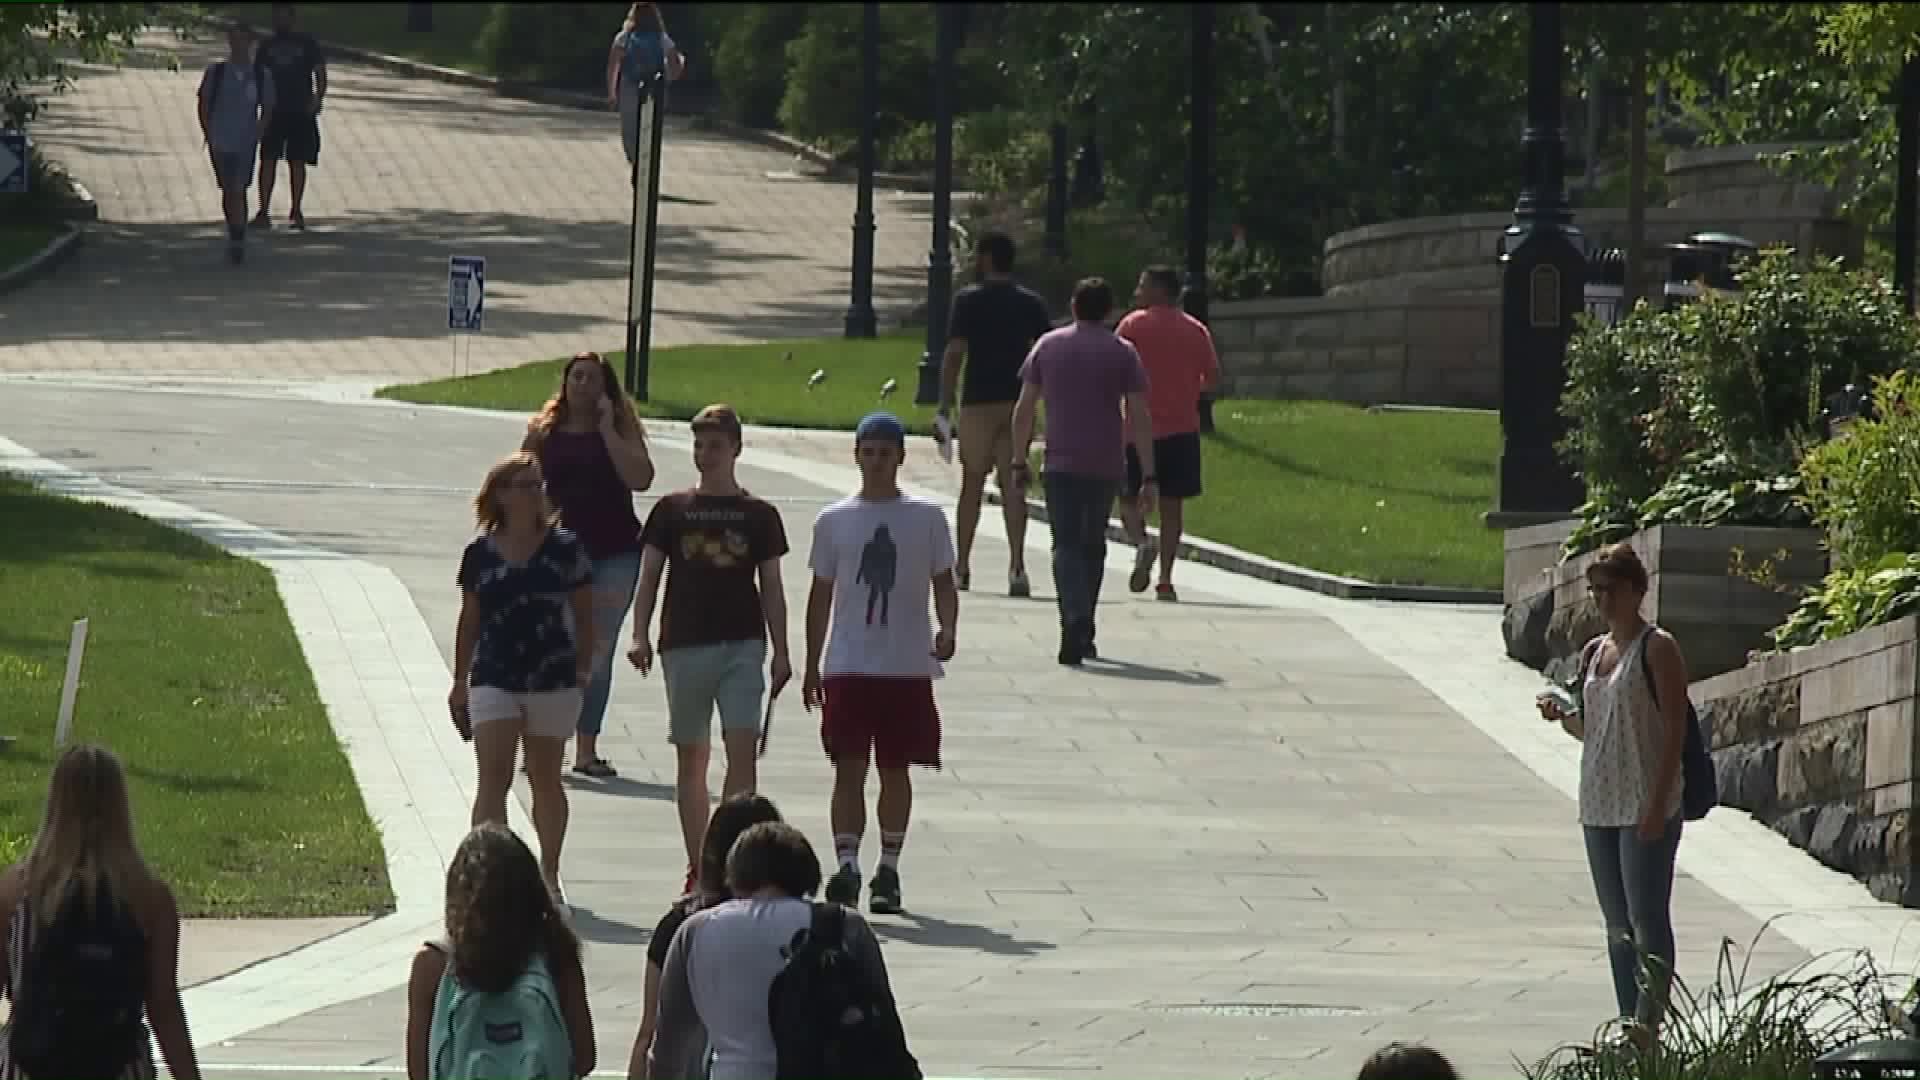 Back to Class for University of Scranton Students